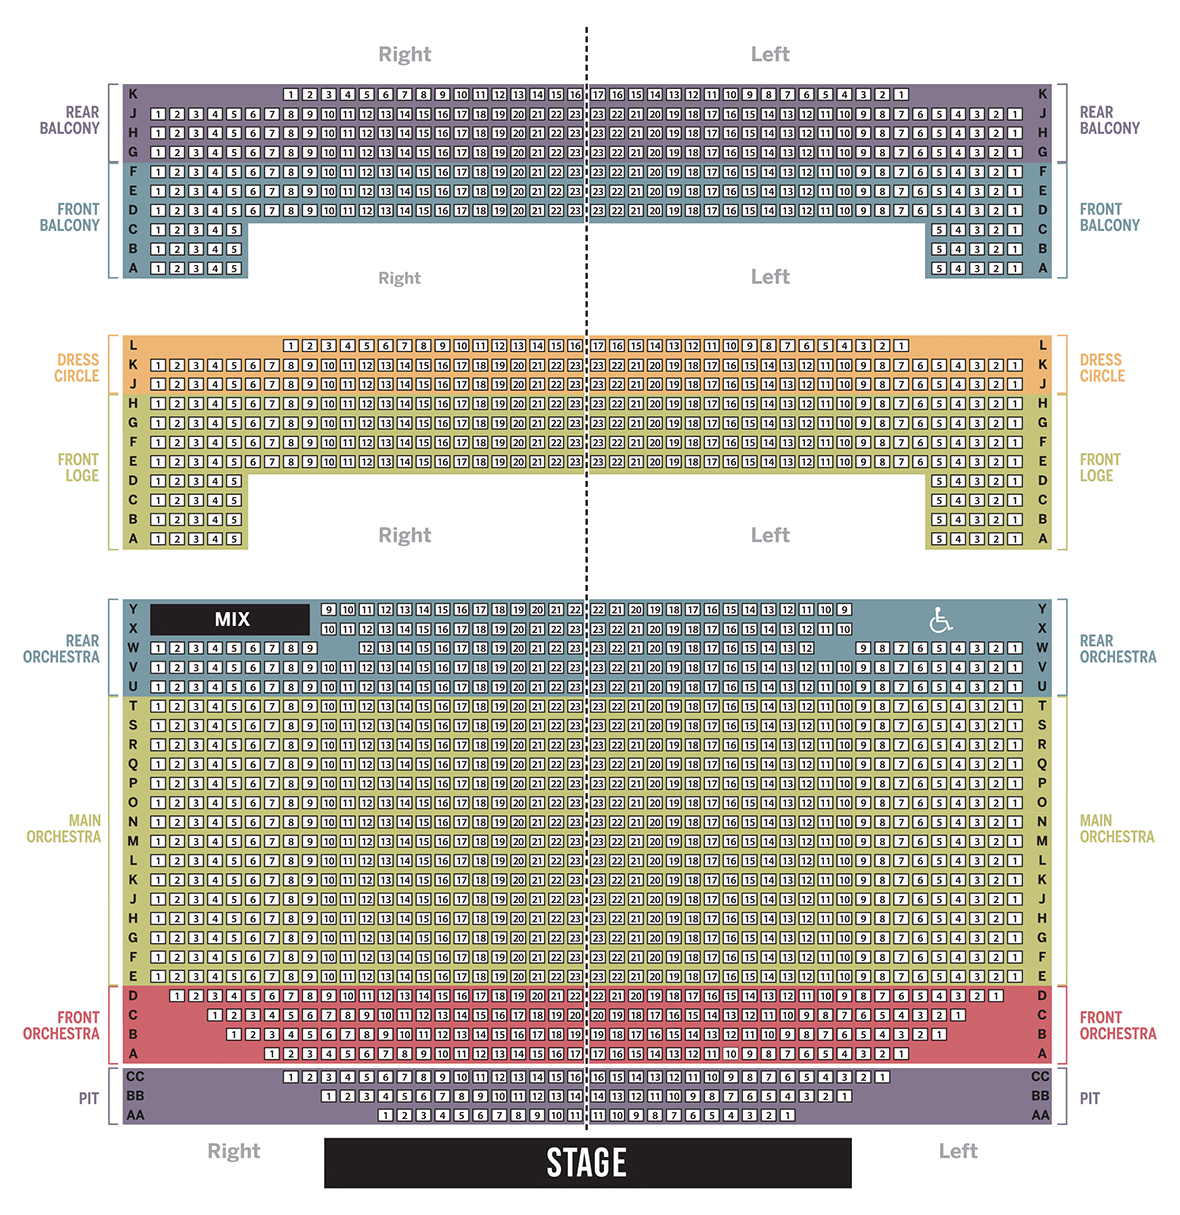 LIVE Seating Chart